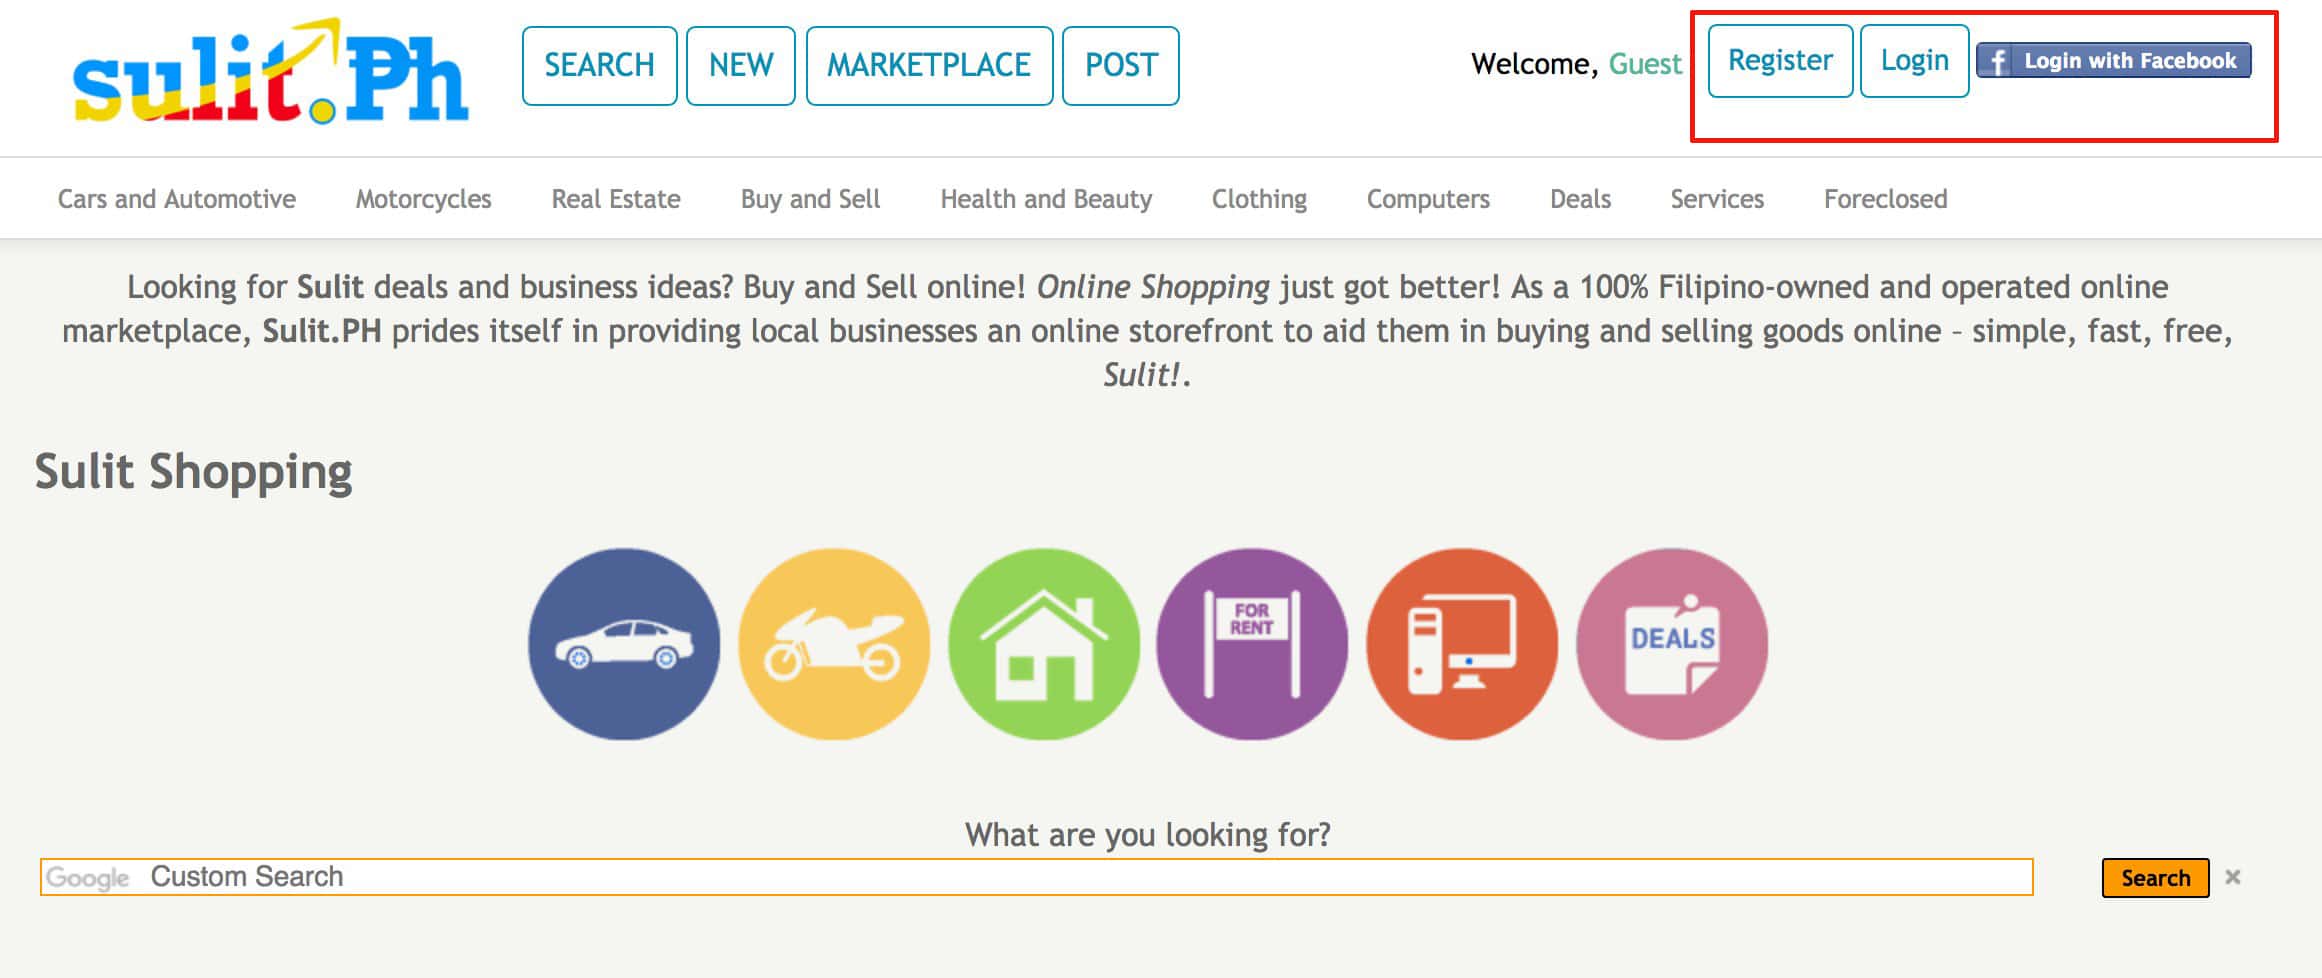 Sullivan PA website screenshot provides a guide on selling in Sulit.